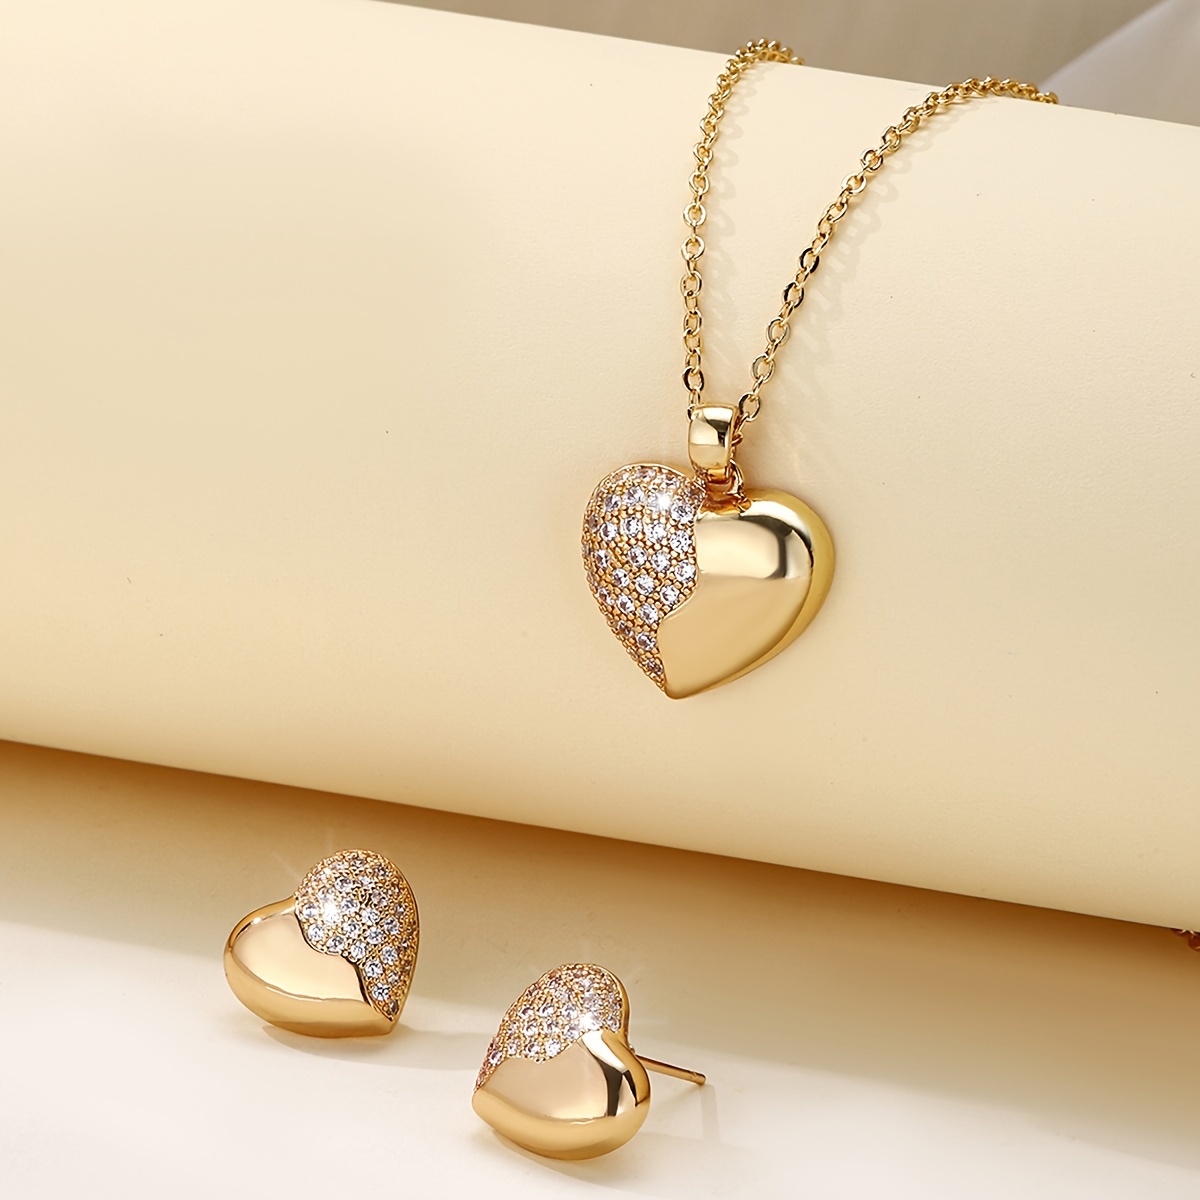 

Stud Earrings + Necklace Chic Jewelry Set 14k Gold Plated Trendy Heart Design Paved Zirconia Match Daily Outfits Party Accessories